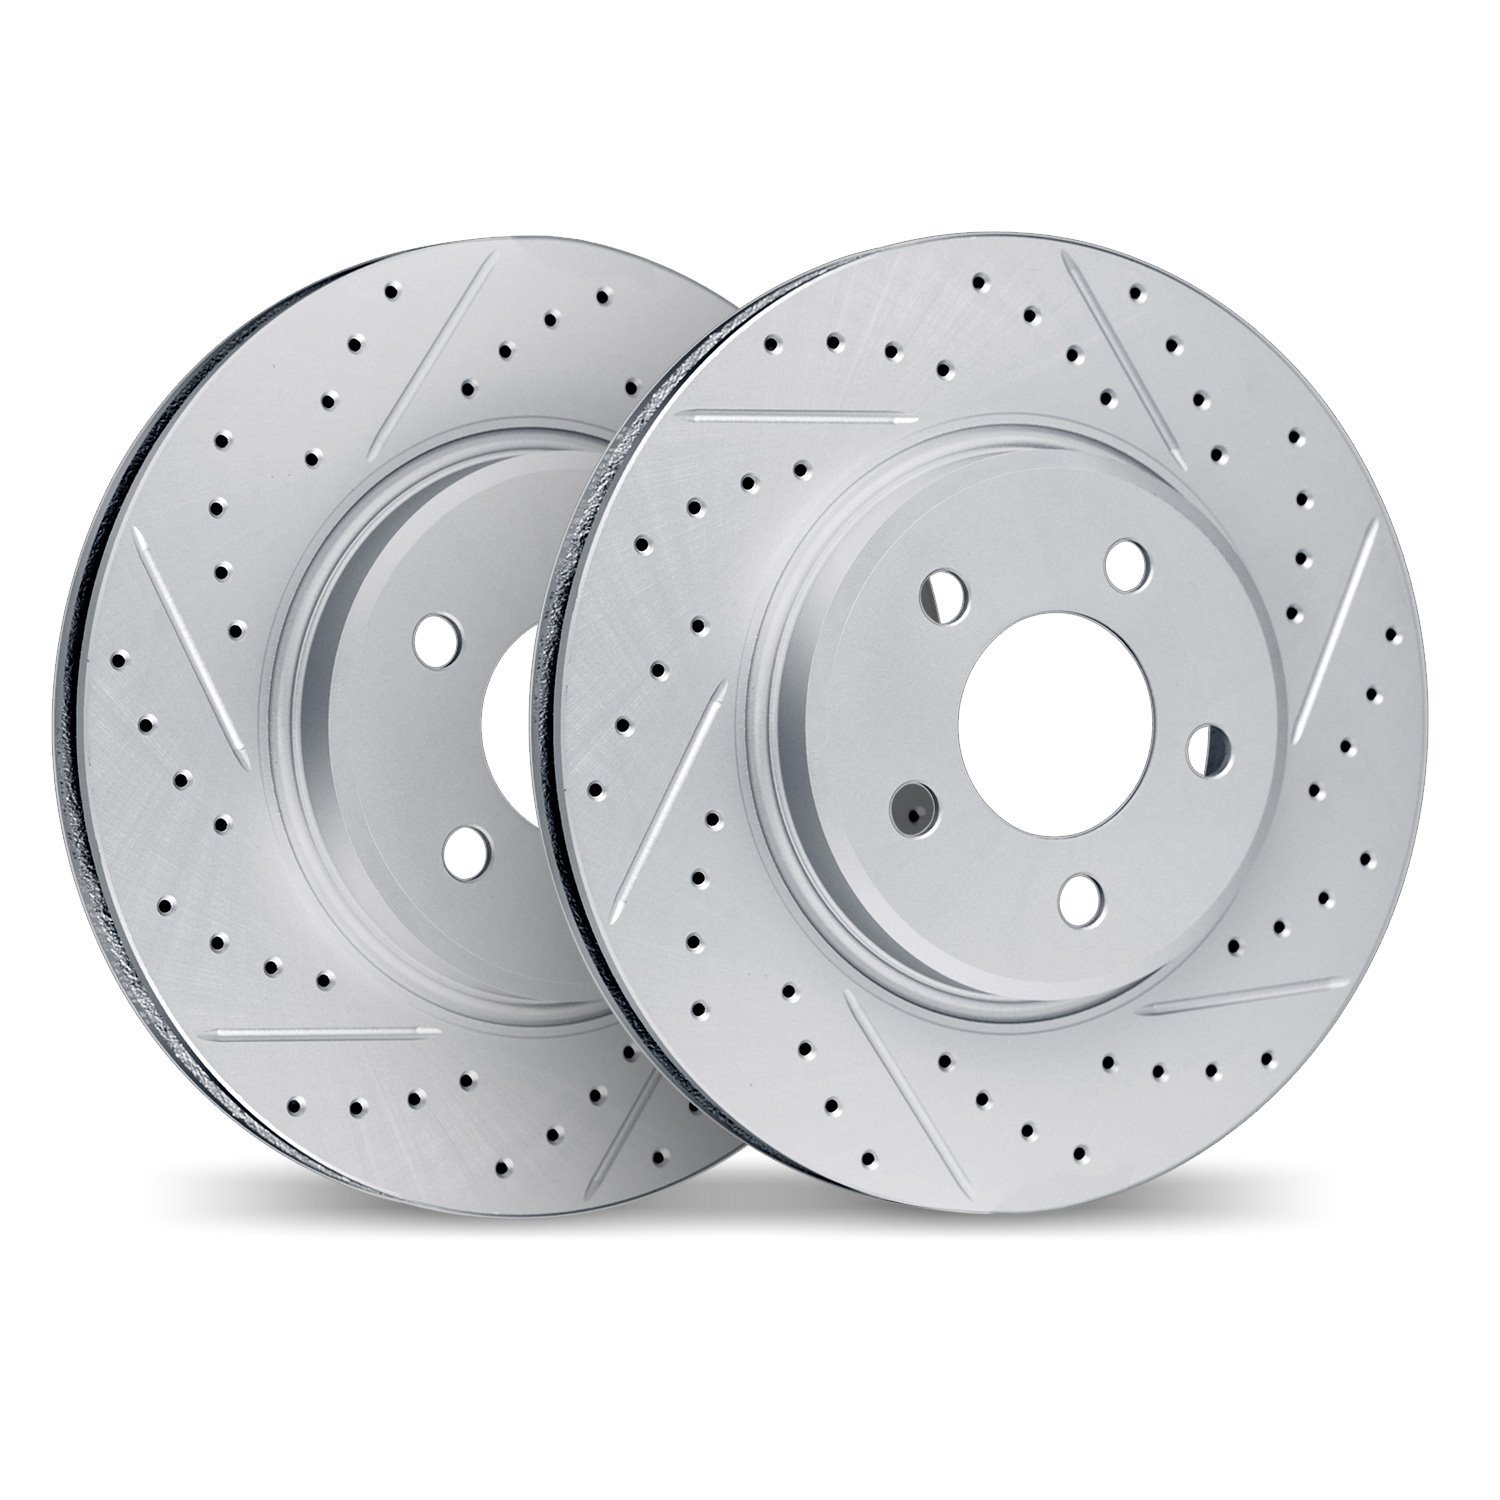 2002-31068 Geoperformance Drilled/Slotted Brake Rotors, 2013-2021 BMW, Position: Rear